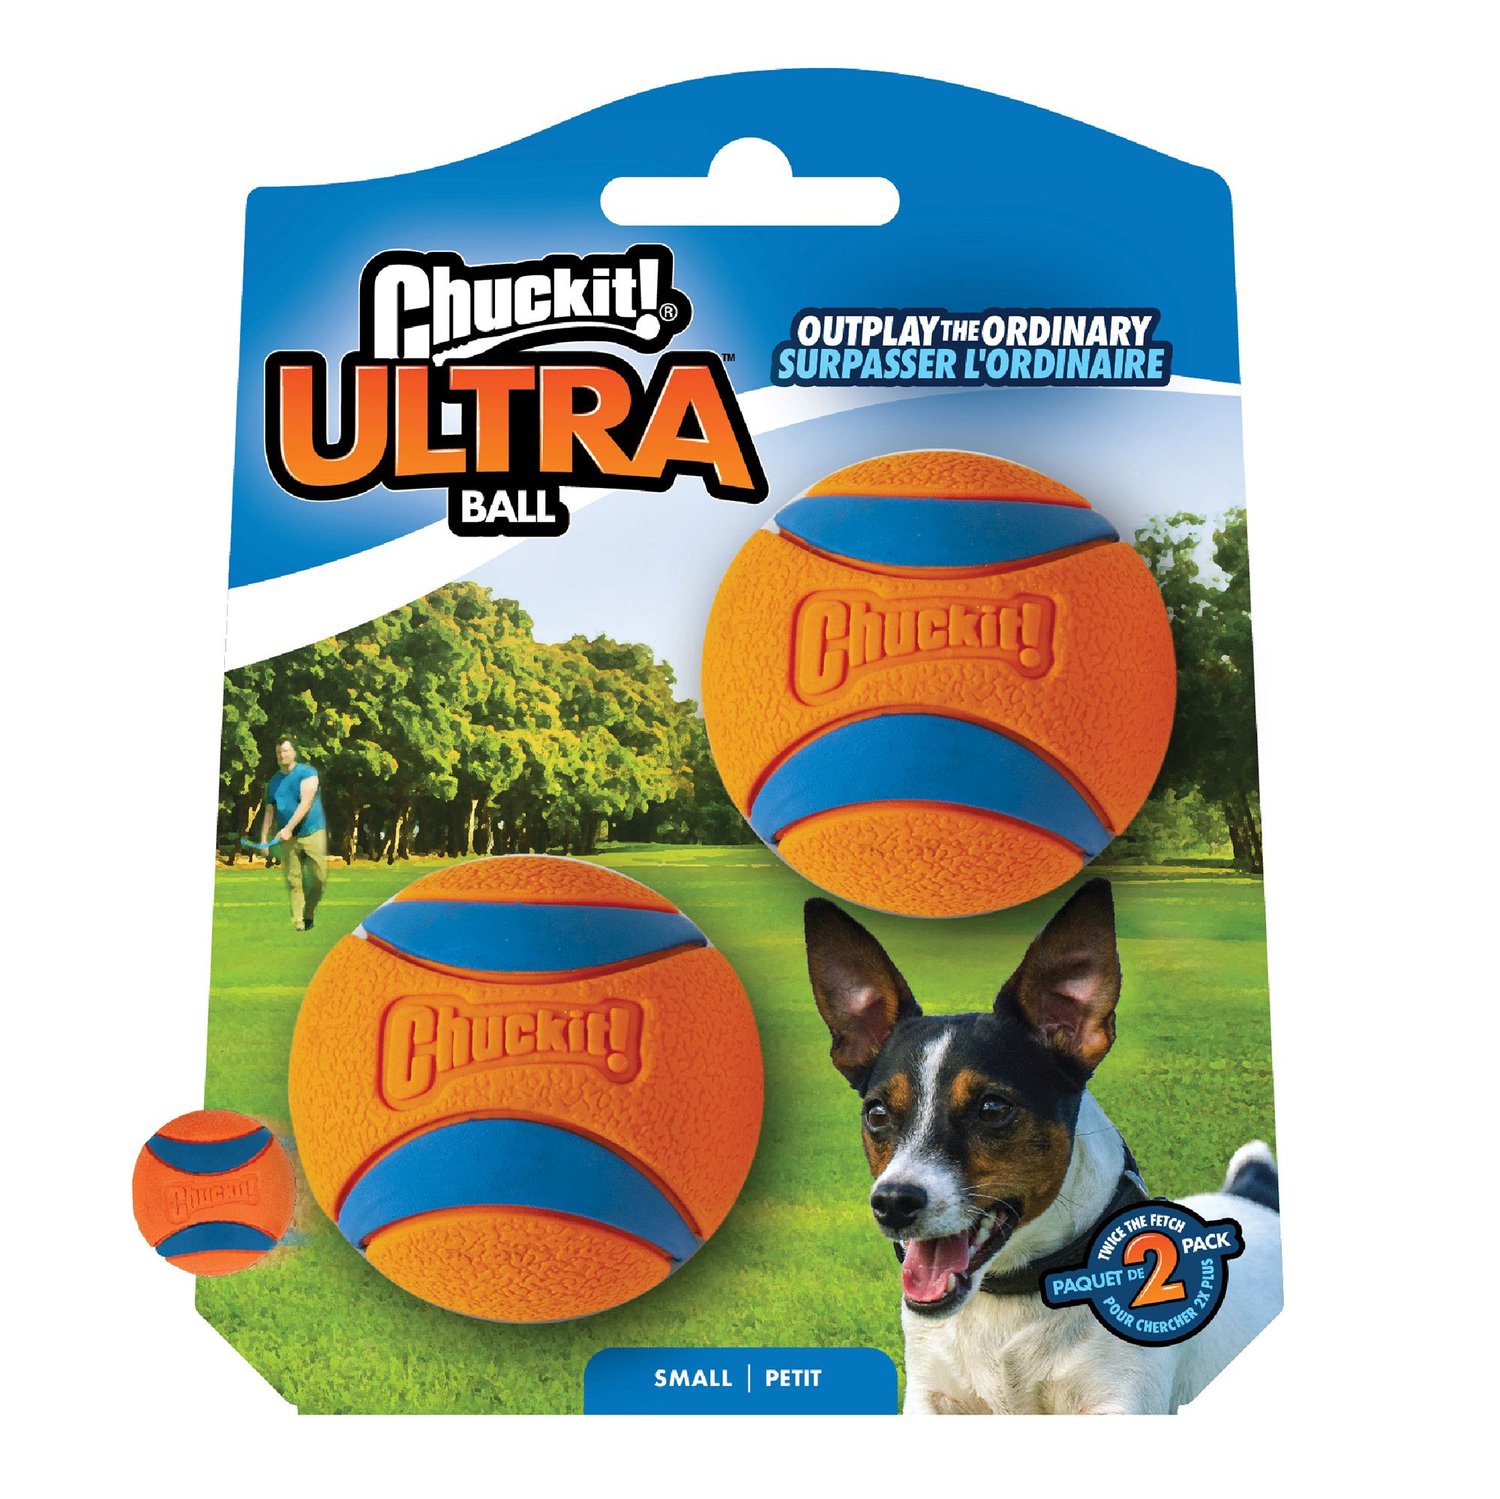 CHUCKIT! Ultra Rubber Ball Tough Dog Toy, Small, 2 pack - Chewy.com